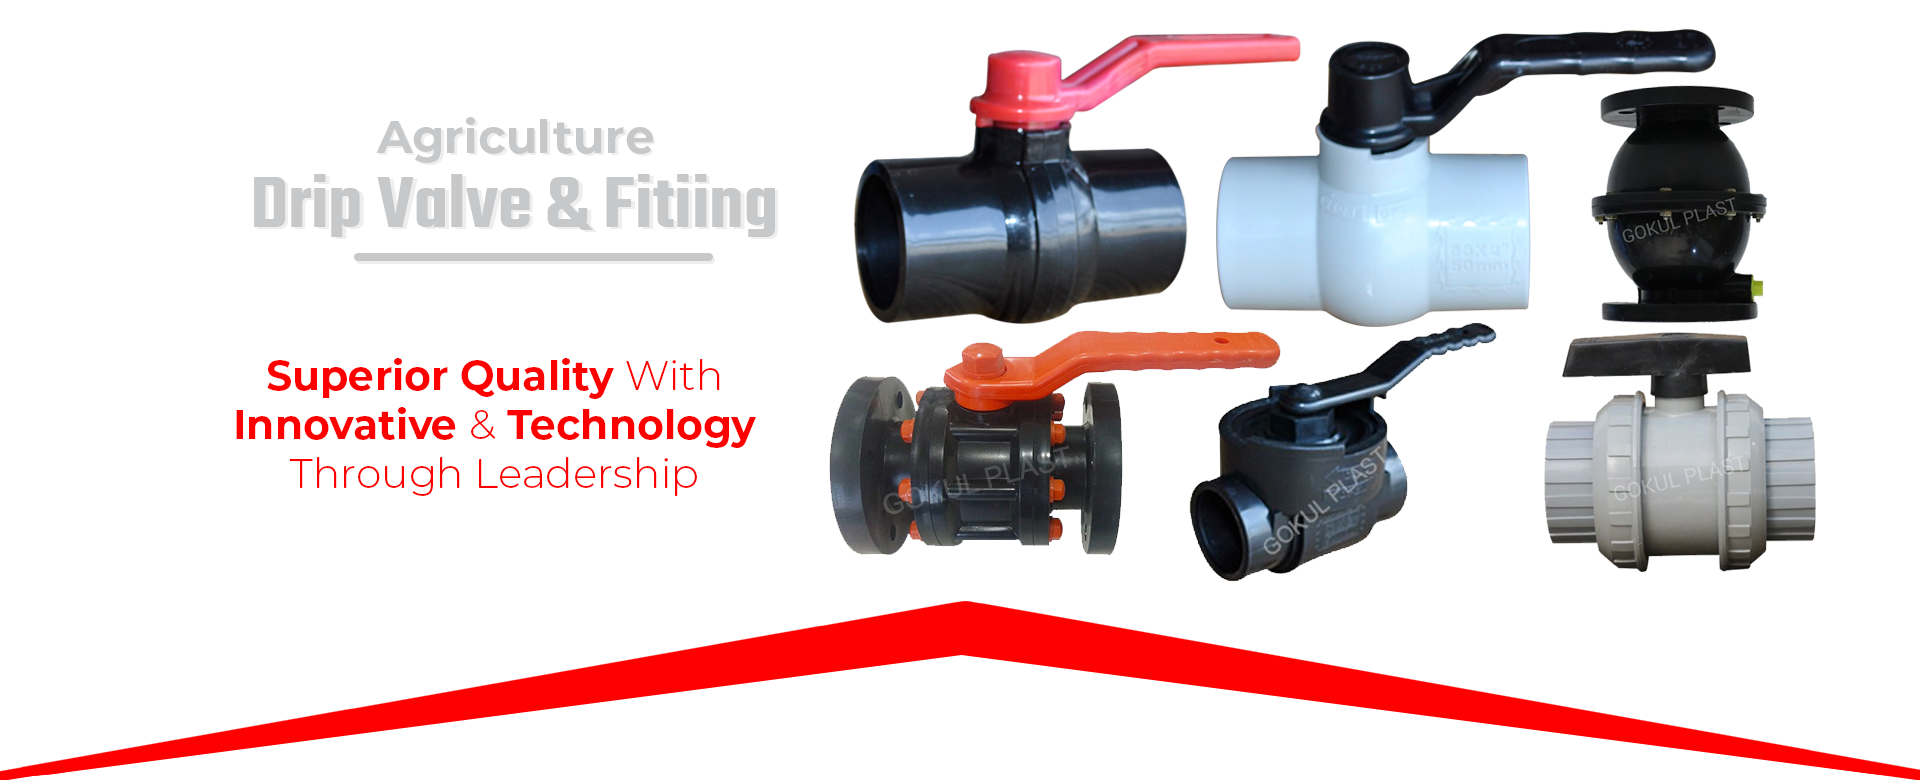 Drip-valve-&-fitiing